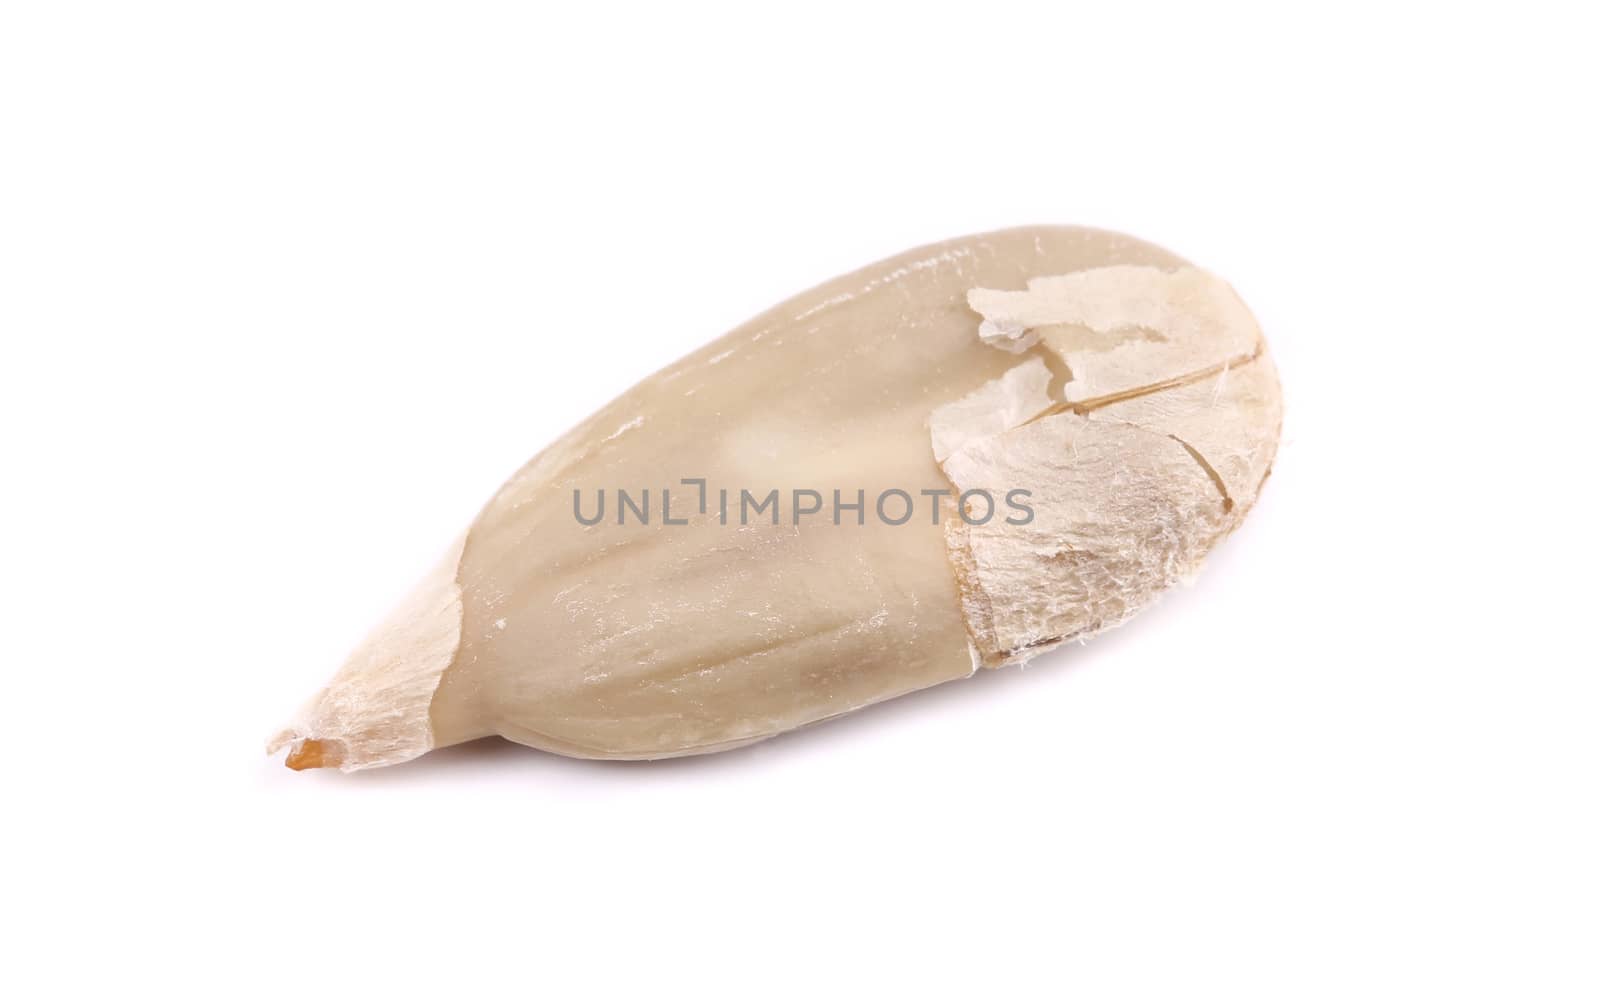 Sunflower seed. Isolated on a white background.